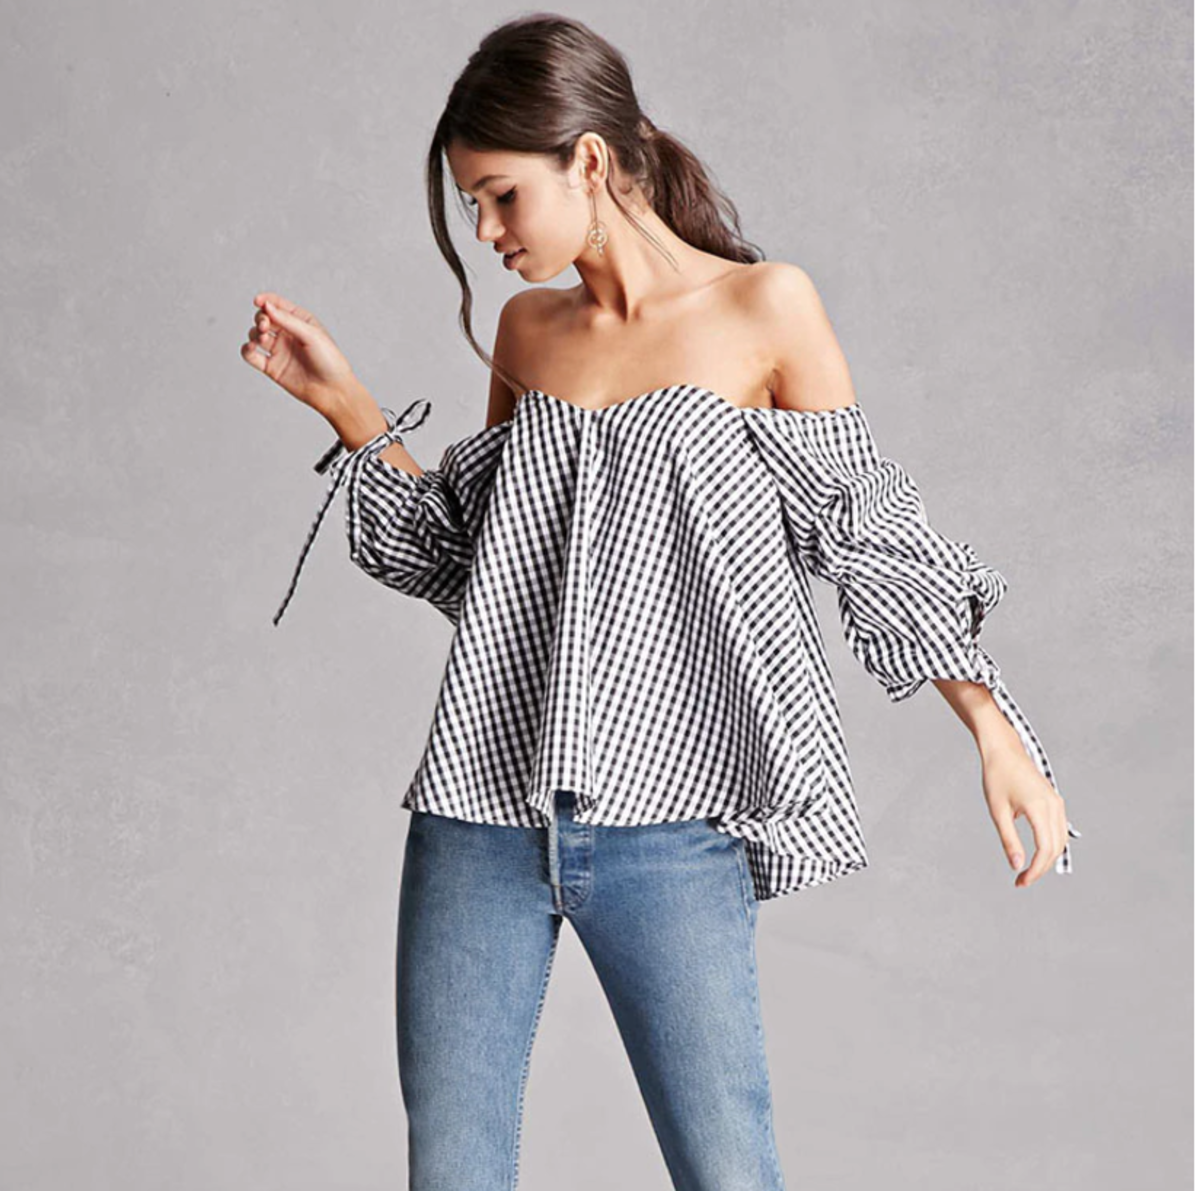 Shop the Item: Gingam Off Shoulder Top ($28) - Alina and Leslie both bought this top upon seeing it 